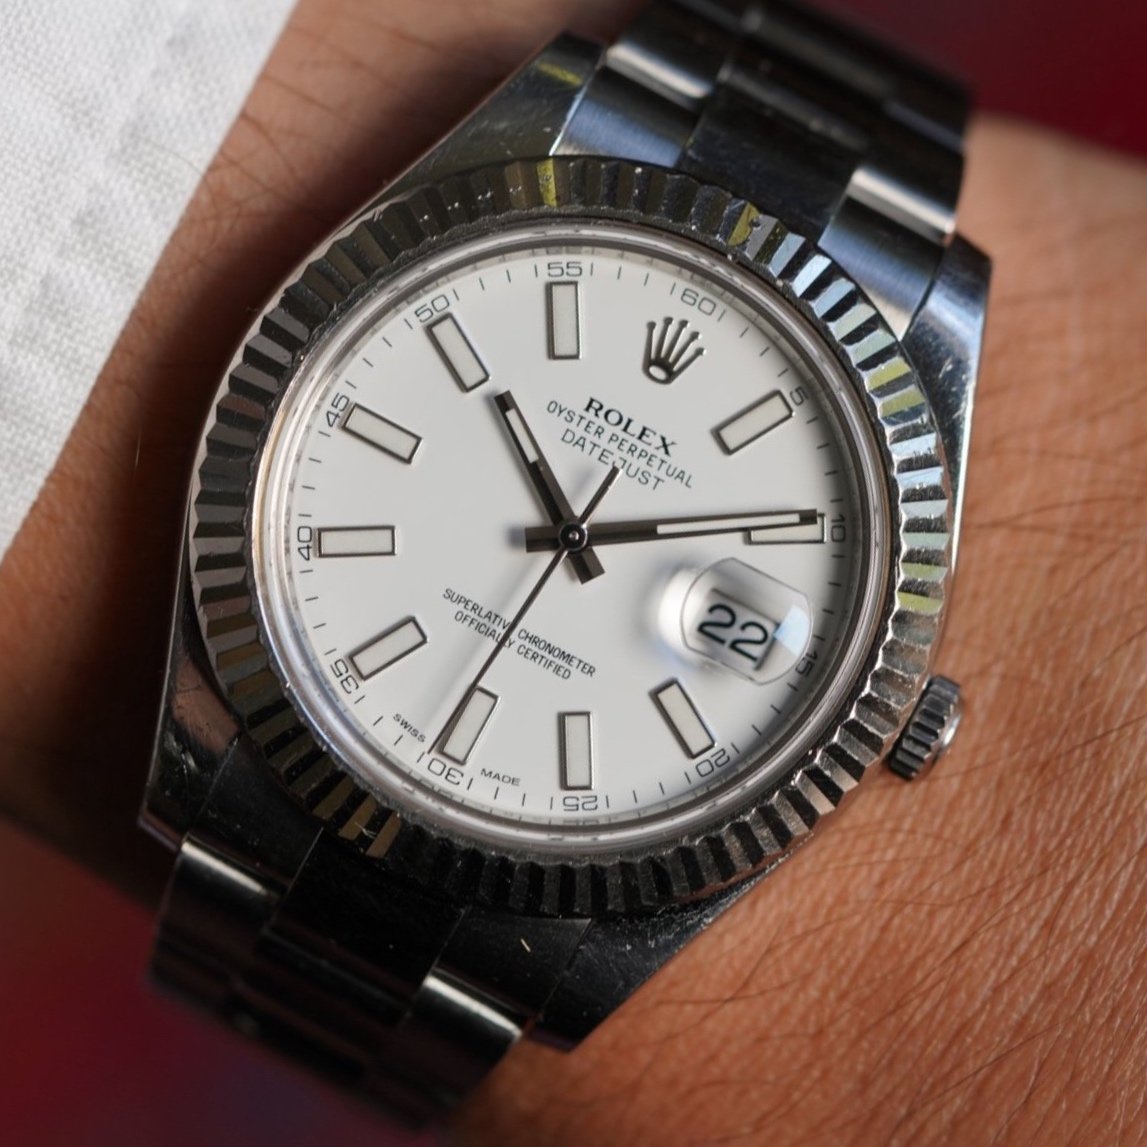 Rolex Datejust Reference 116334 Unpolished